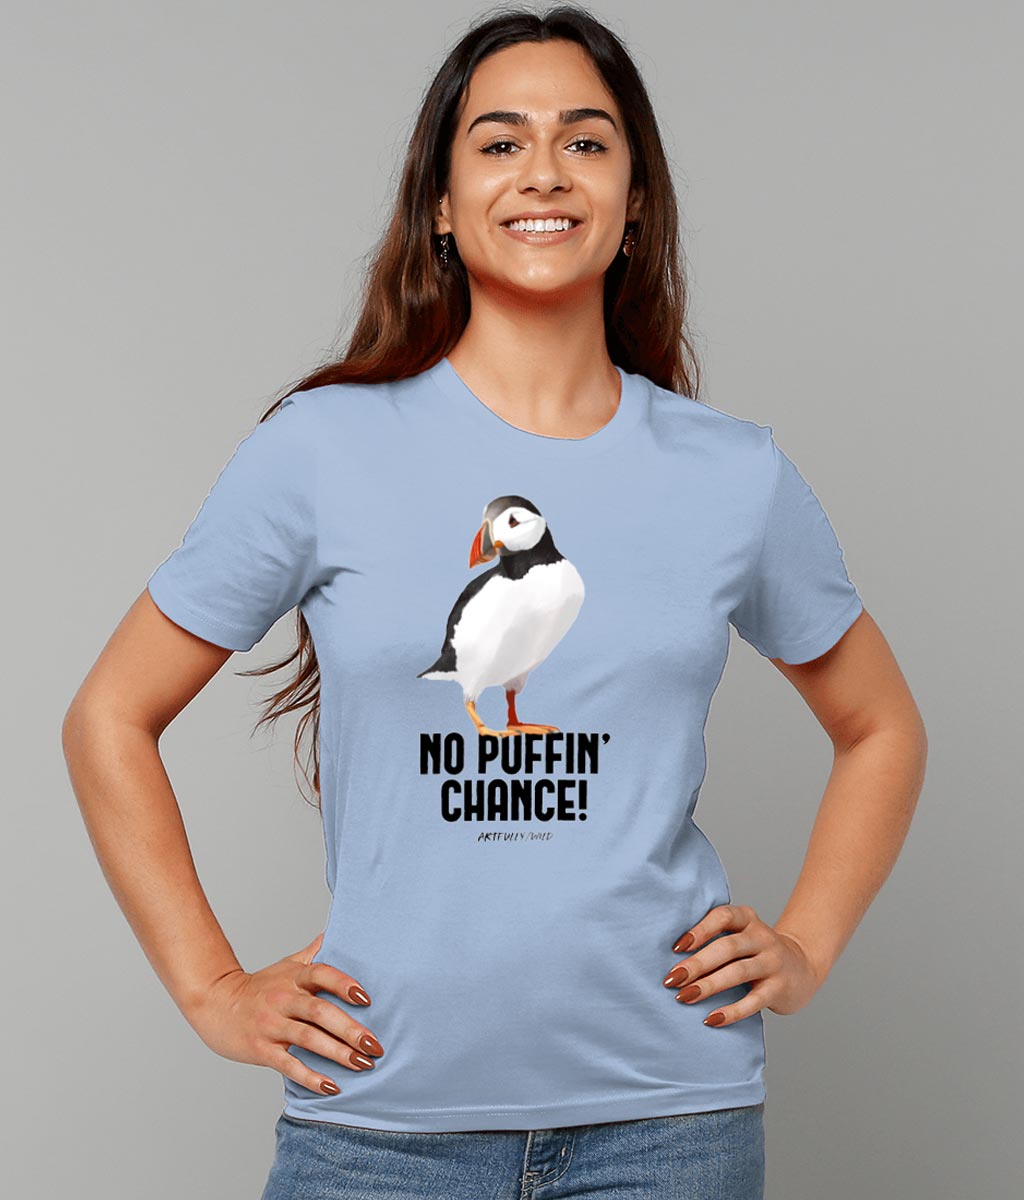 Female model wearing 'NO PUFFIN CHANCE' Print on Sky Blue Organic T-Shirt. Unisex/Women/Men. Ethical Clothing. Original Painted Illustration by Artfully/Wild. Printed with water-based inks.